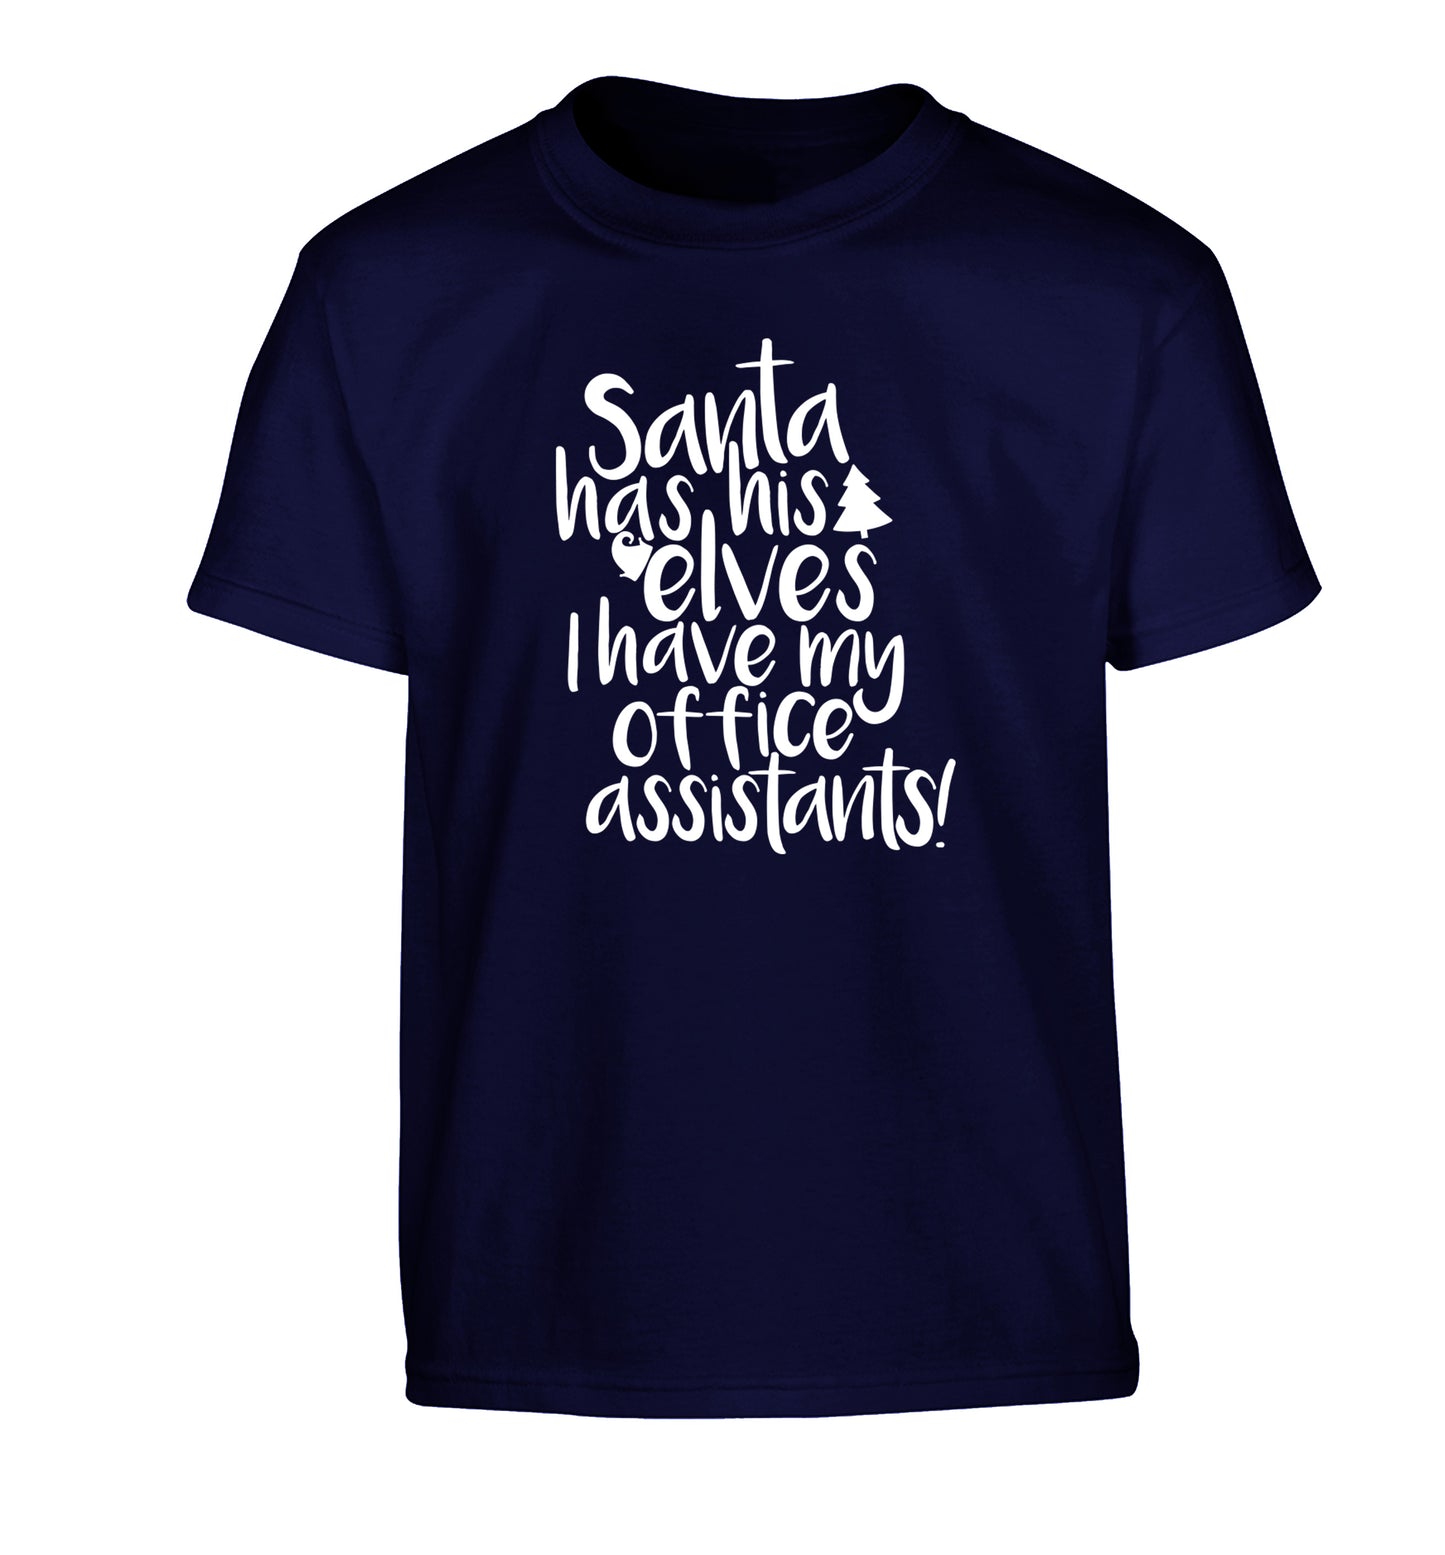 Santa has his elves I have my office assistants Children's navy Tshirt 12-14 Years